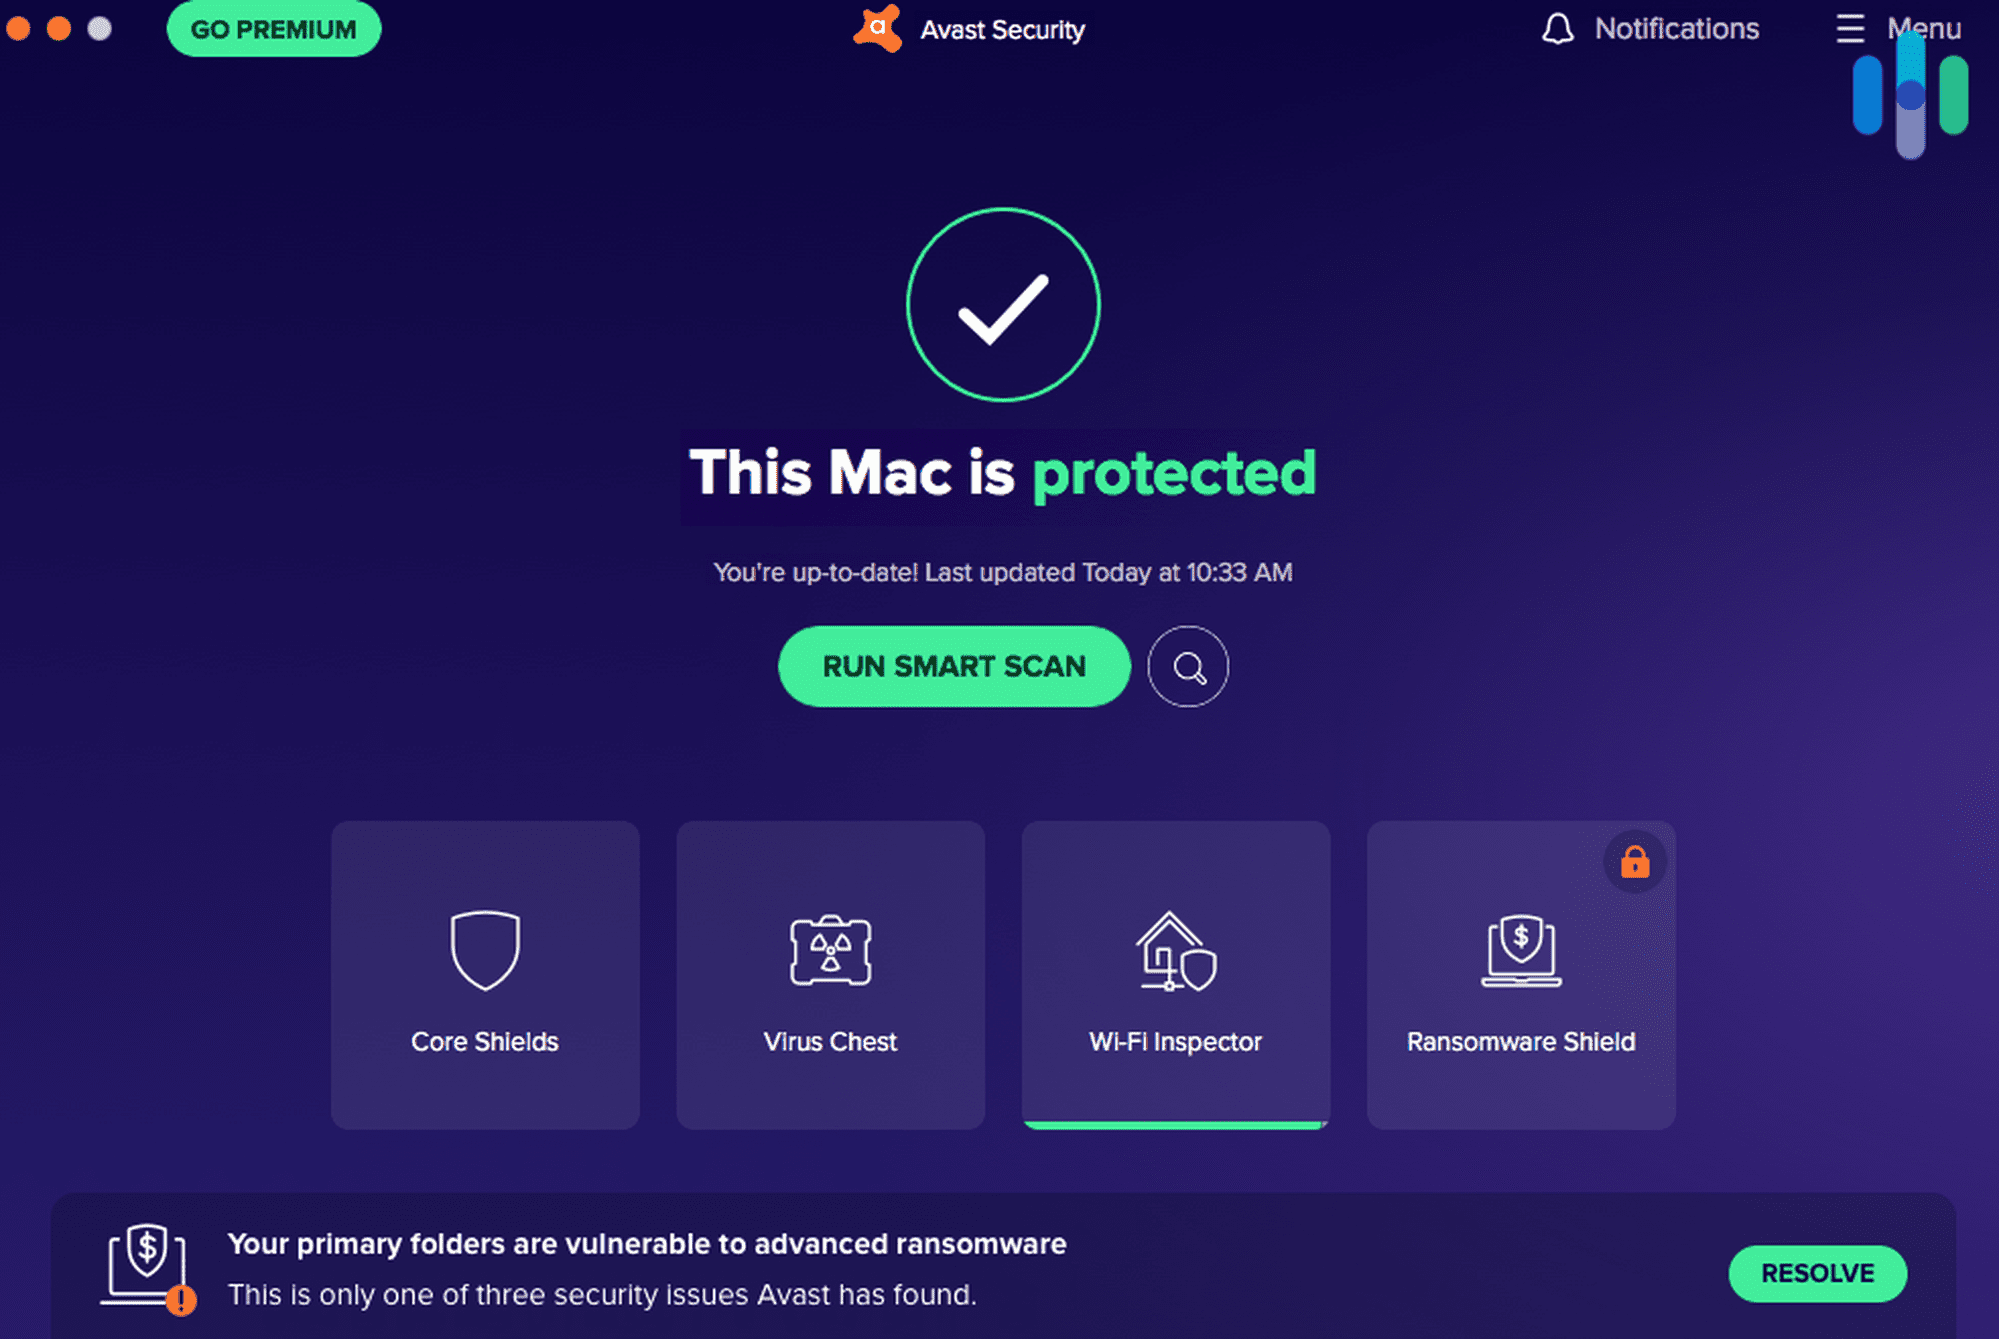 Do Need Antivirus for My Mac or Is It Built In?